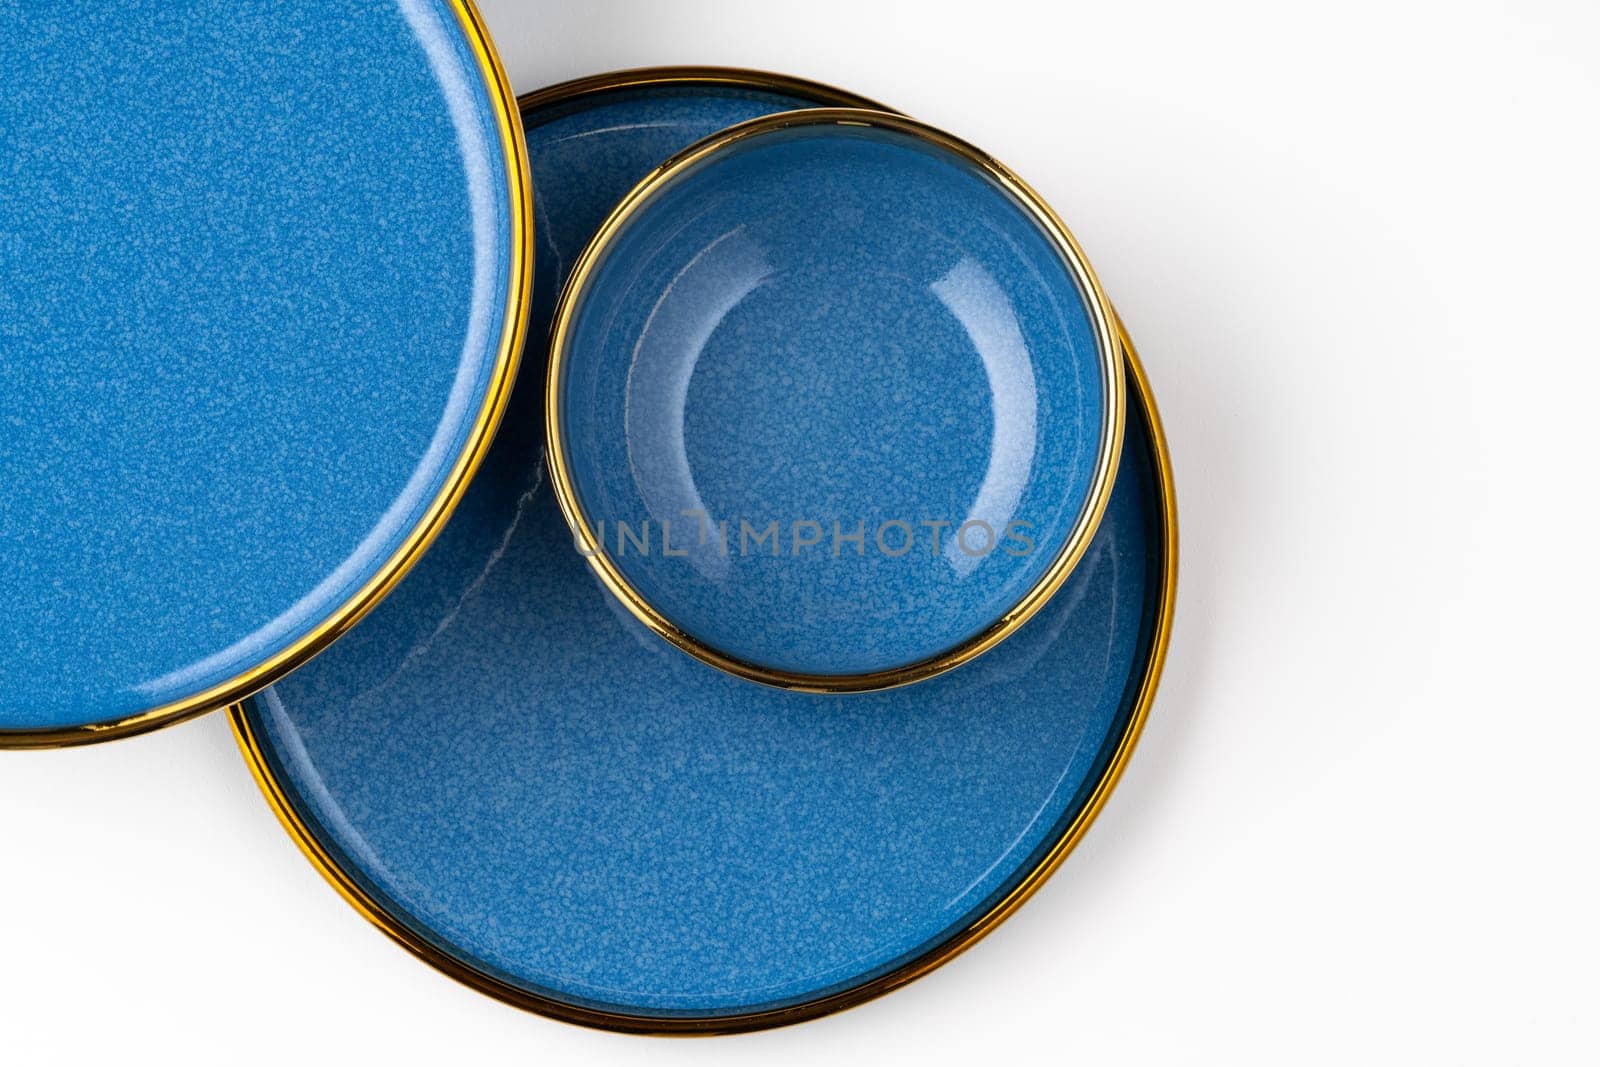 A set of blue ceramic plates on a white background. Top view